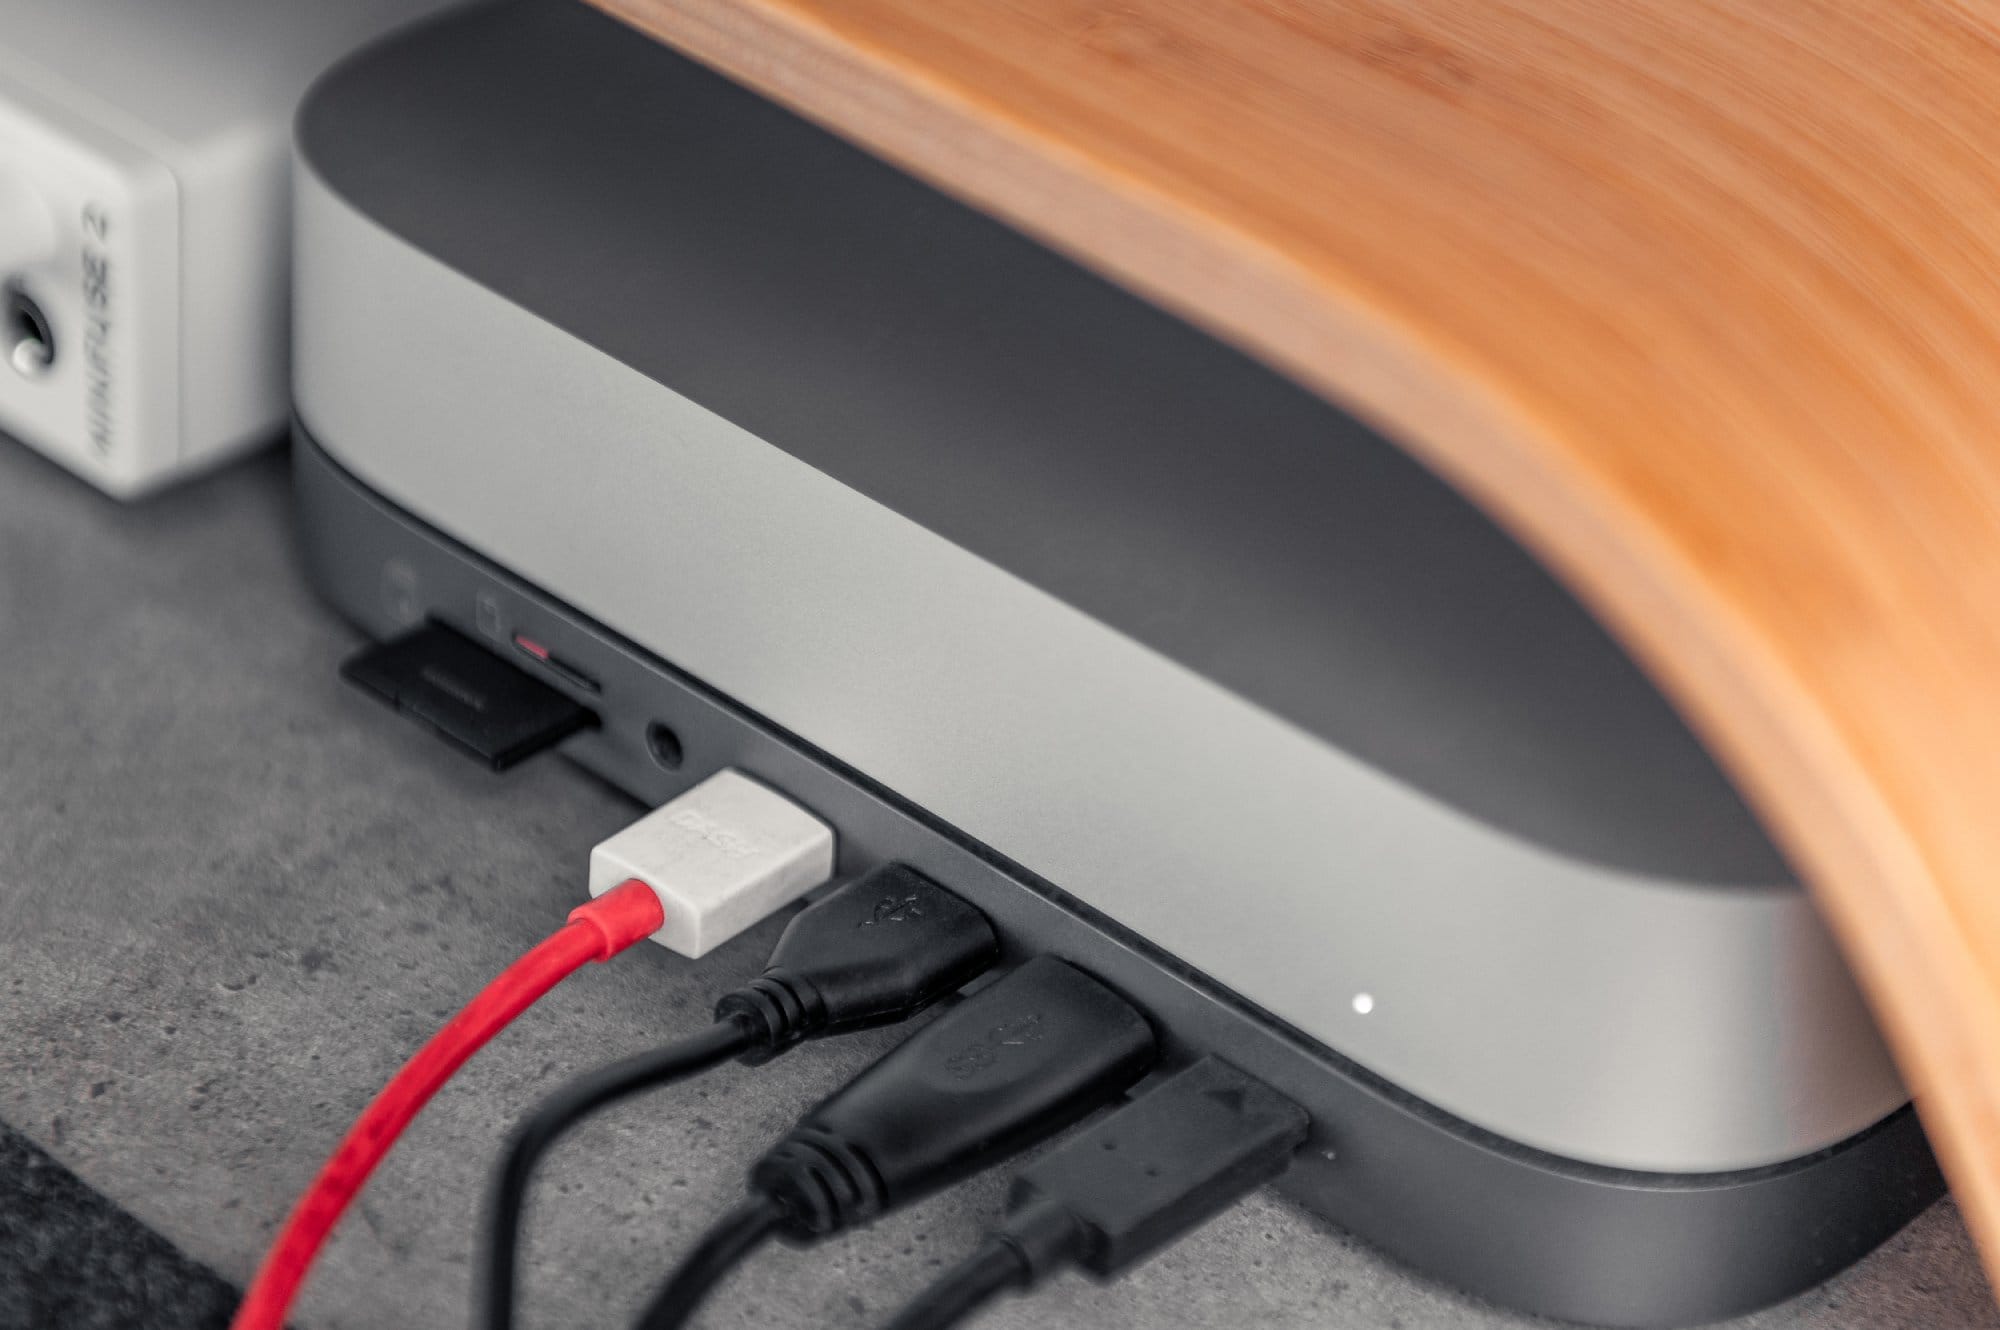  A close-up of a desk showing the underside of a wooden monitor stand with a laptop dock underneath and various cables plugged into it, including a prominent red one